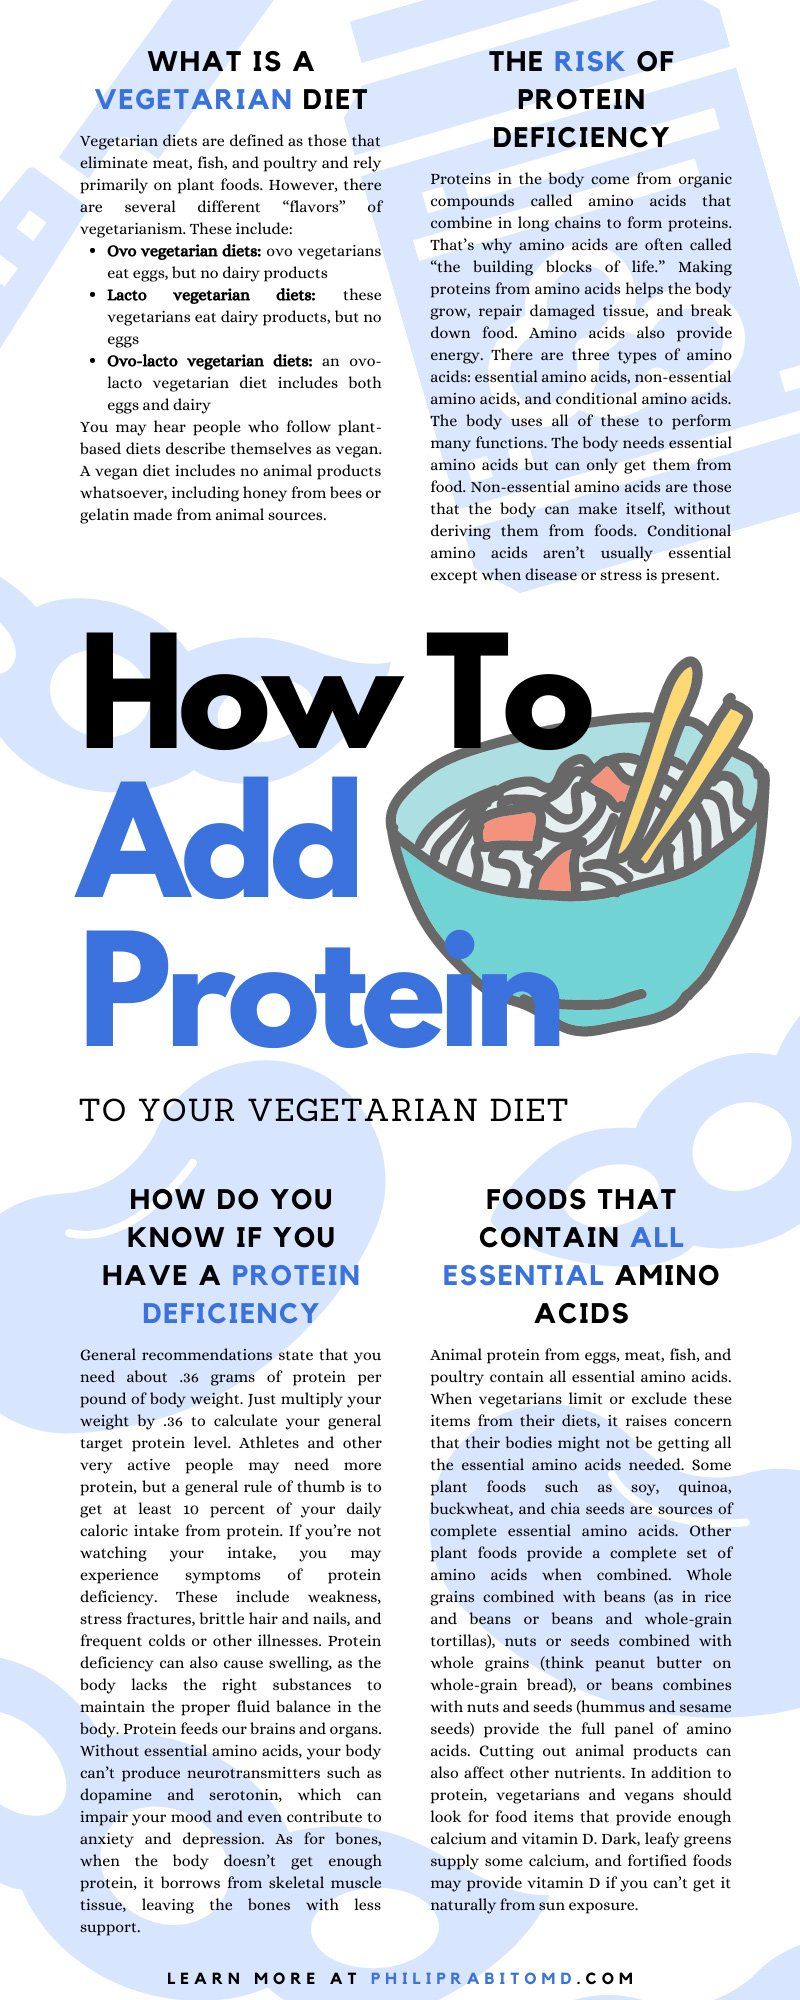 How To Add Protein To Your Vegetarian Diet